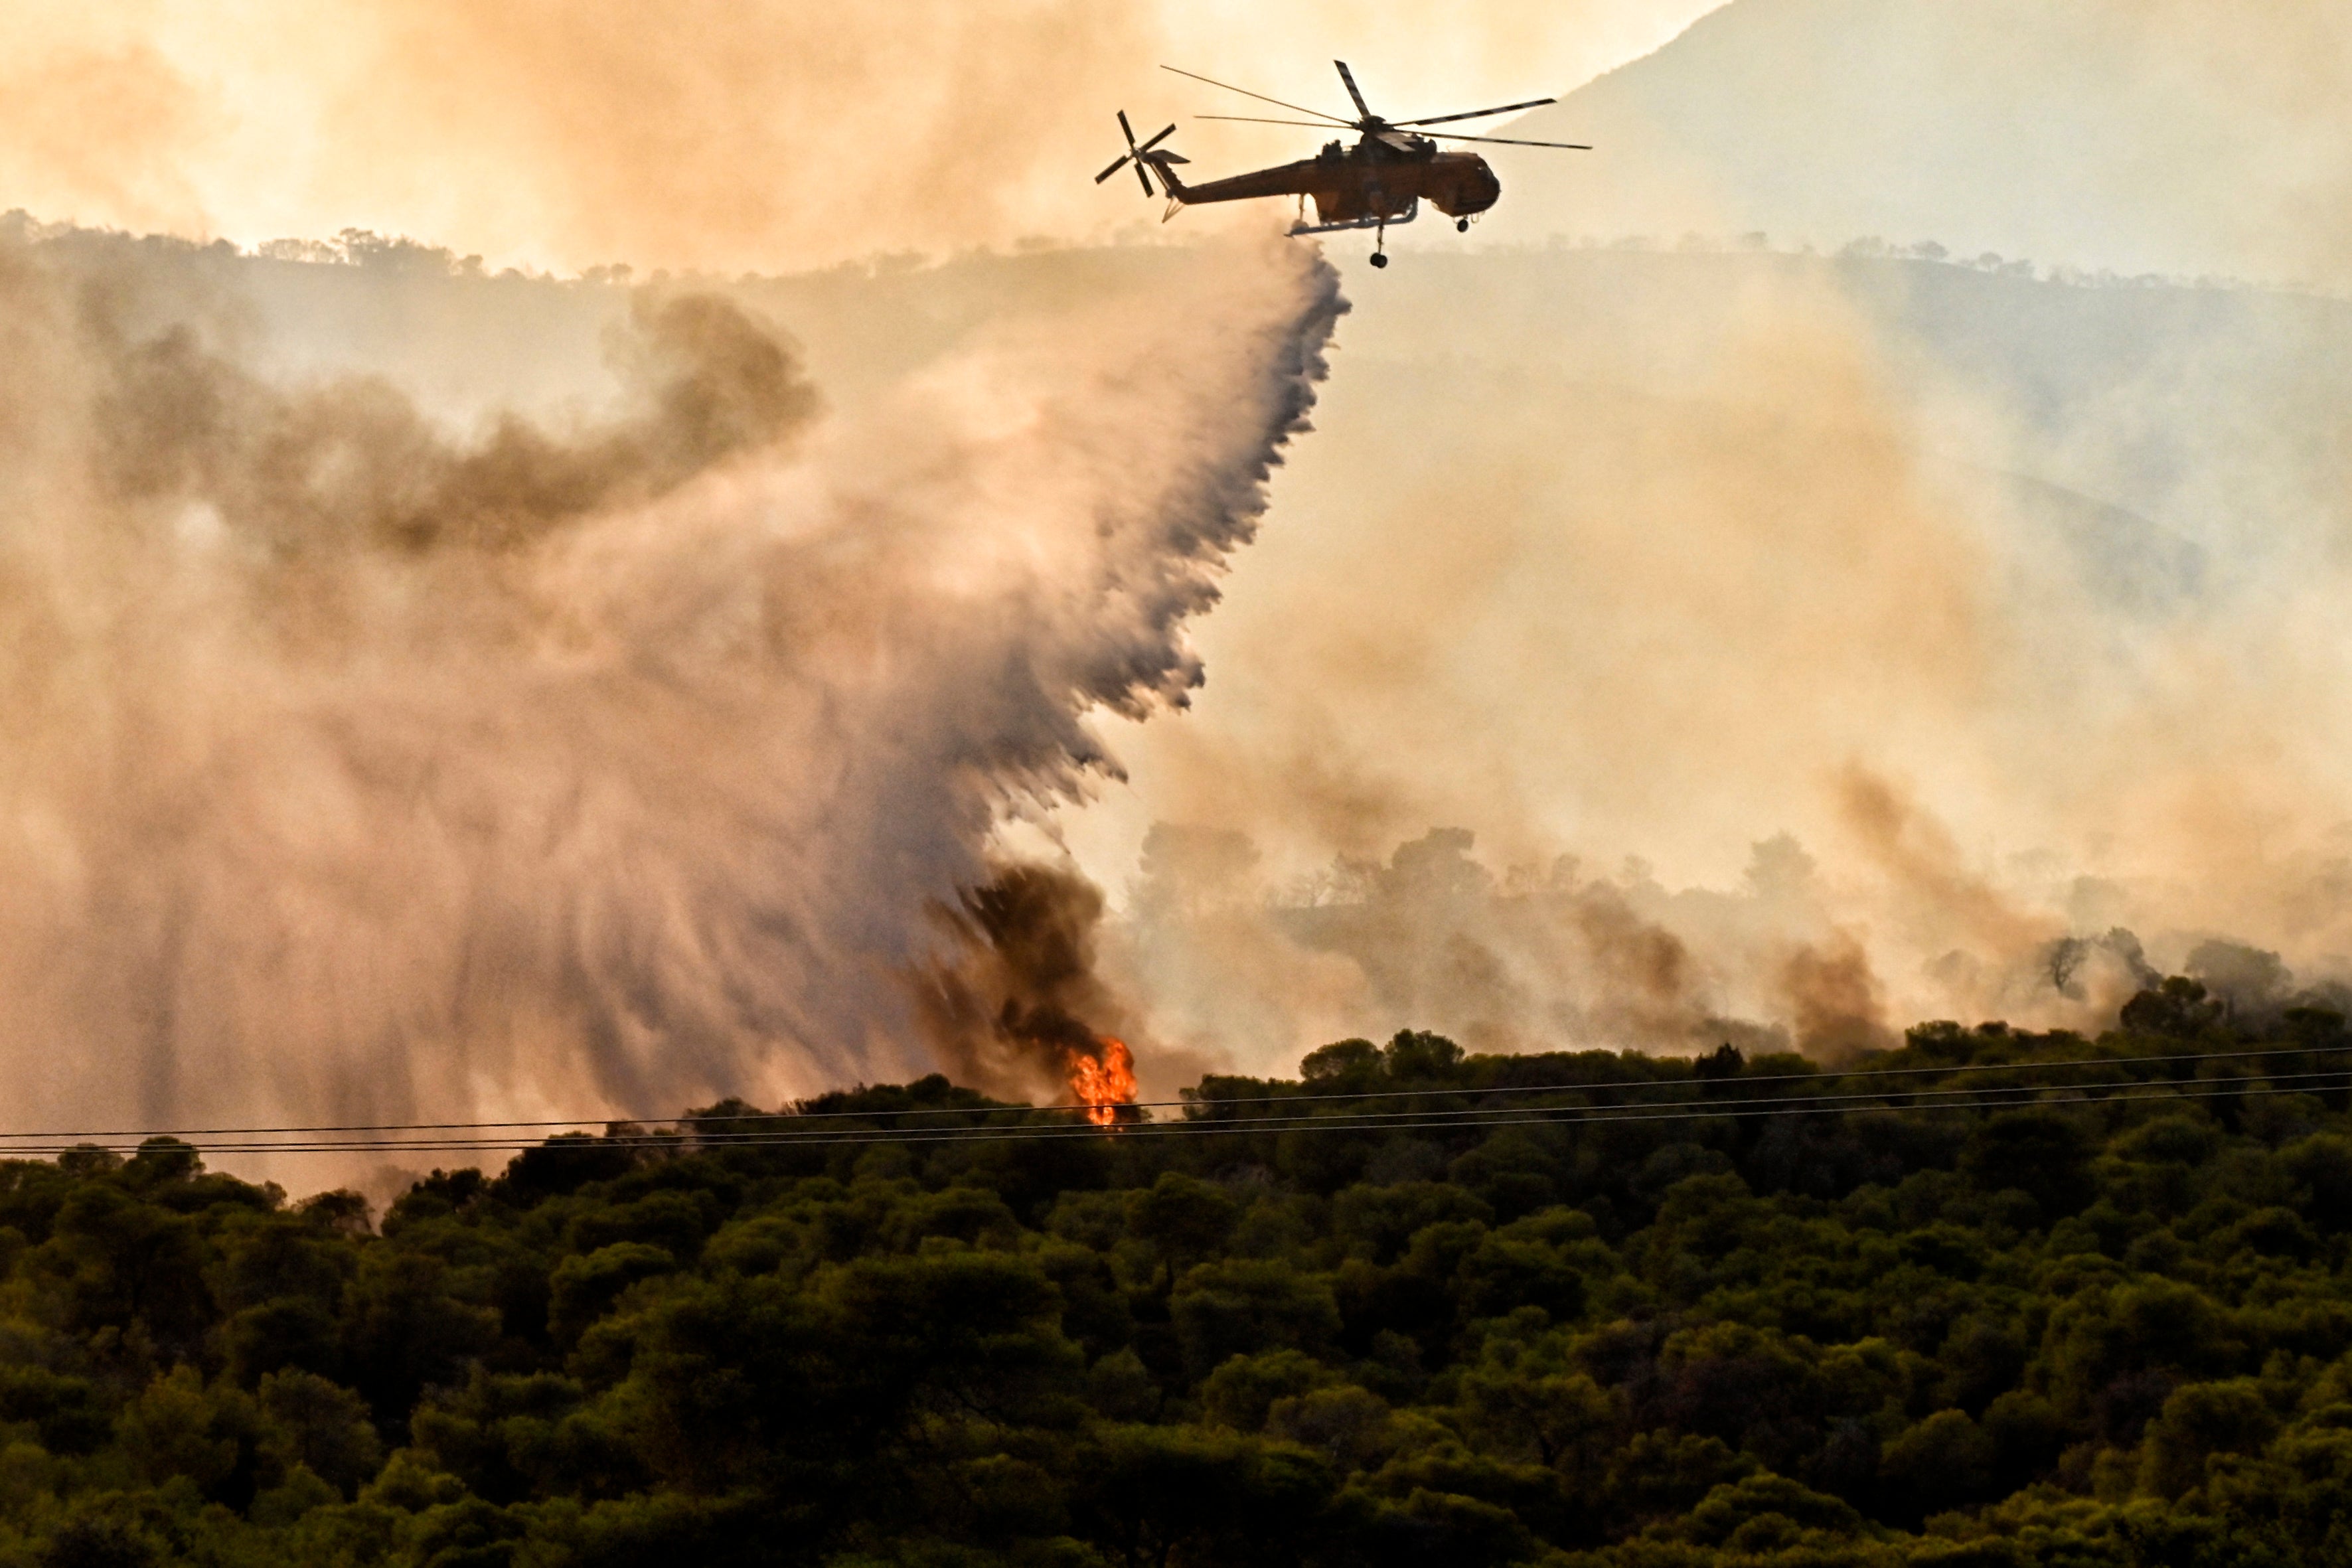 A firefighting aircraft drops water to extinguish a wildfire at Aghios Charalambos area in Loutraki, Corinth, Greece